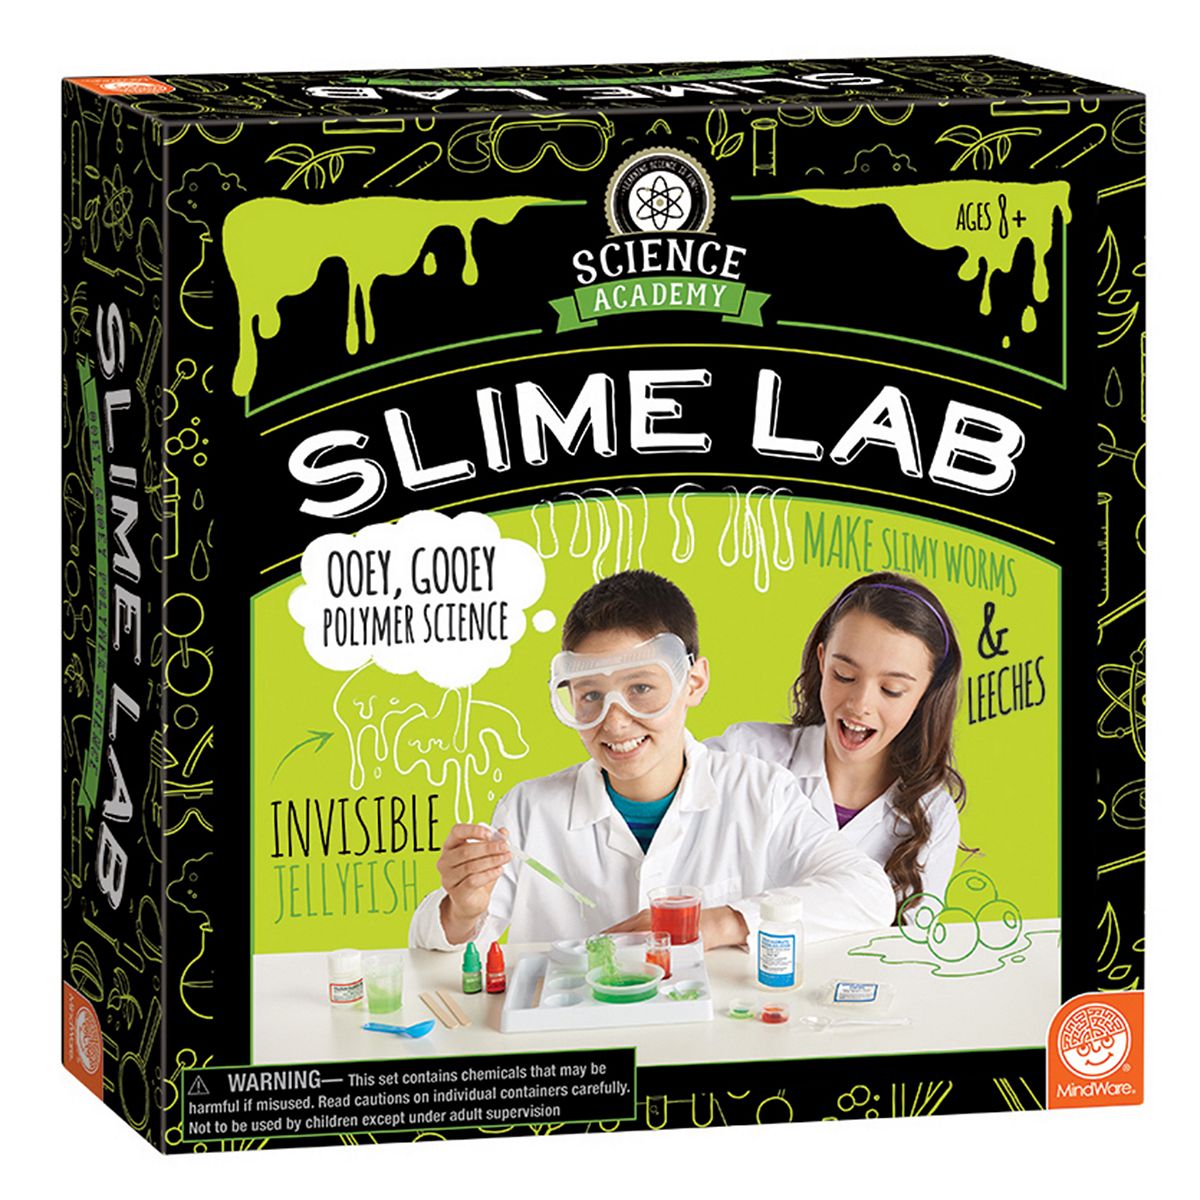 Slime Lab Science Academy